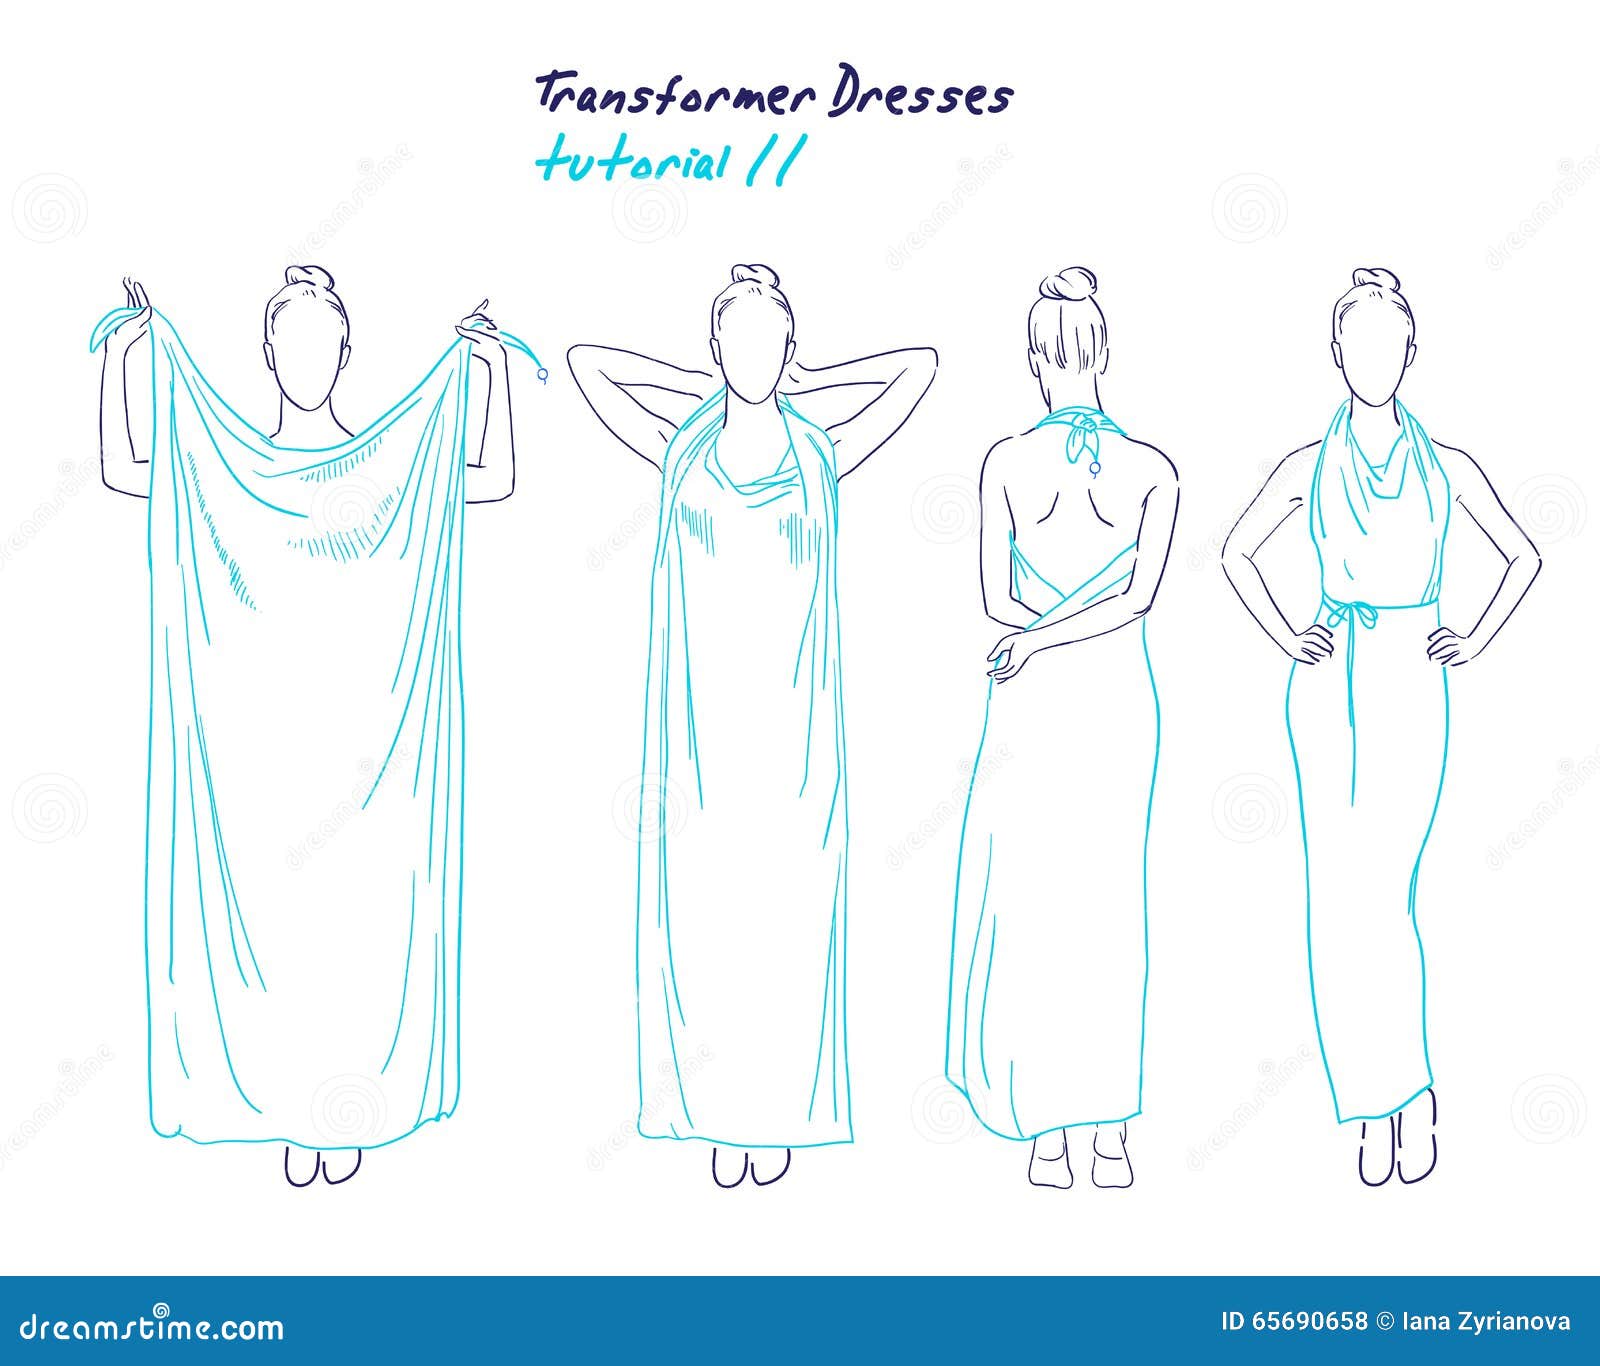 Transformer Dresses Women Clothes and Accessories, Hand Drawn ...